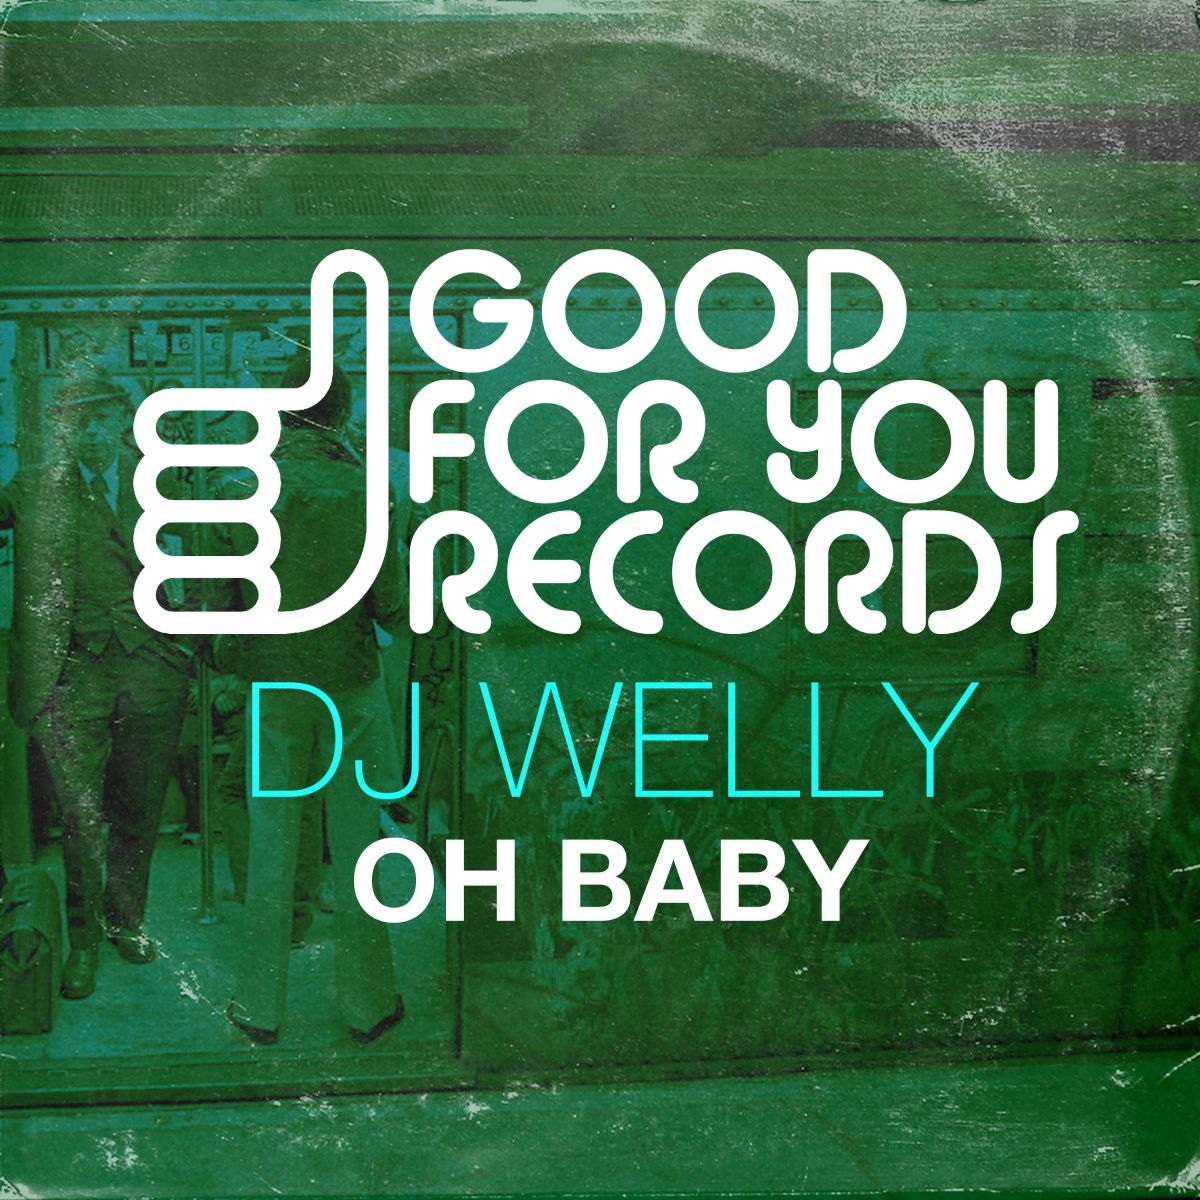 Dj Welly - Oh Baby (This Is A House Record) / Good For You Records